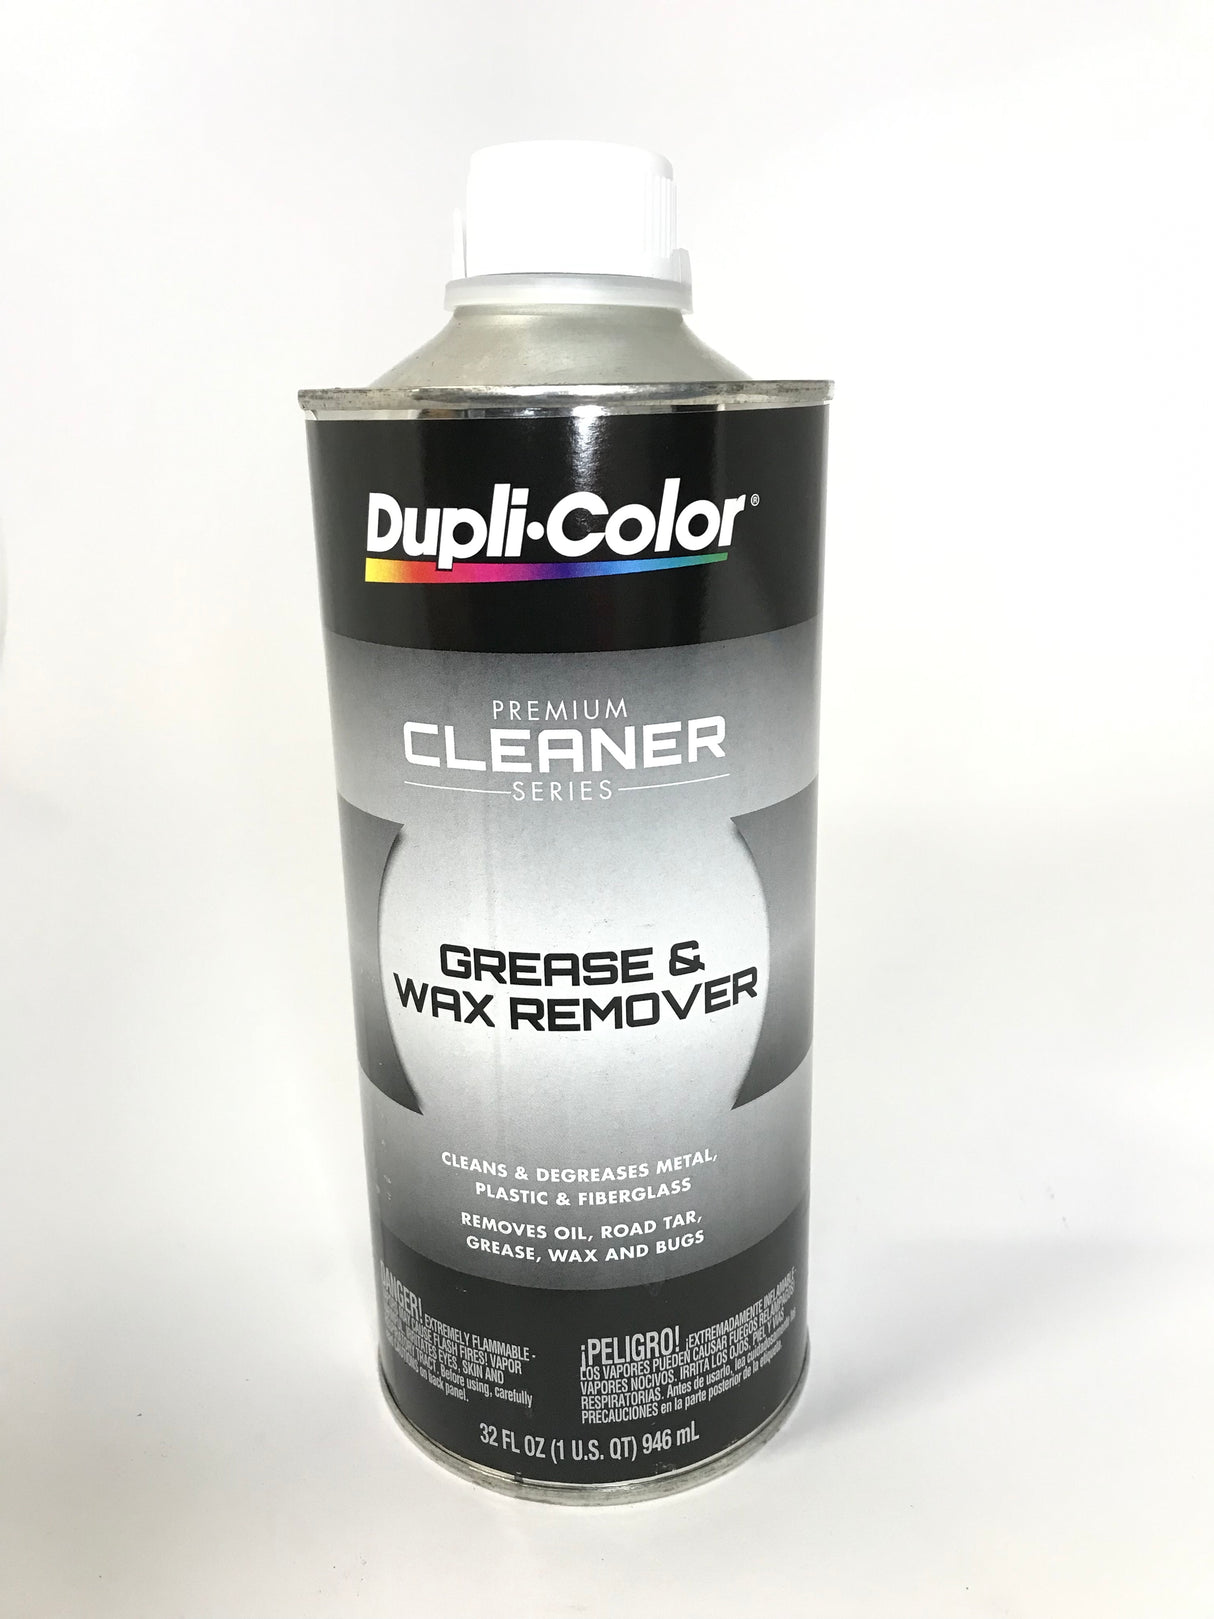 DUPLICOLOR CM541 Premium Cleaner Series Grease and Wax Remover -1 quart